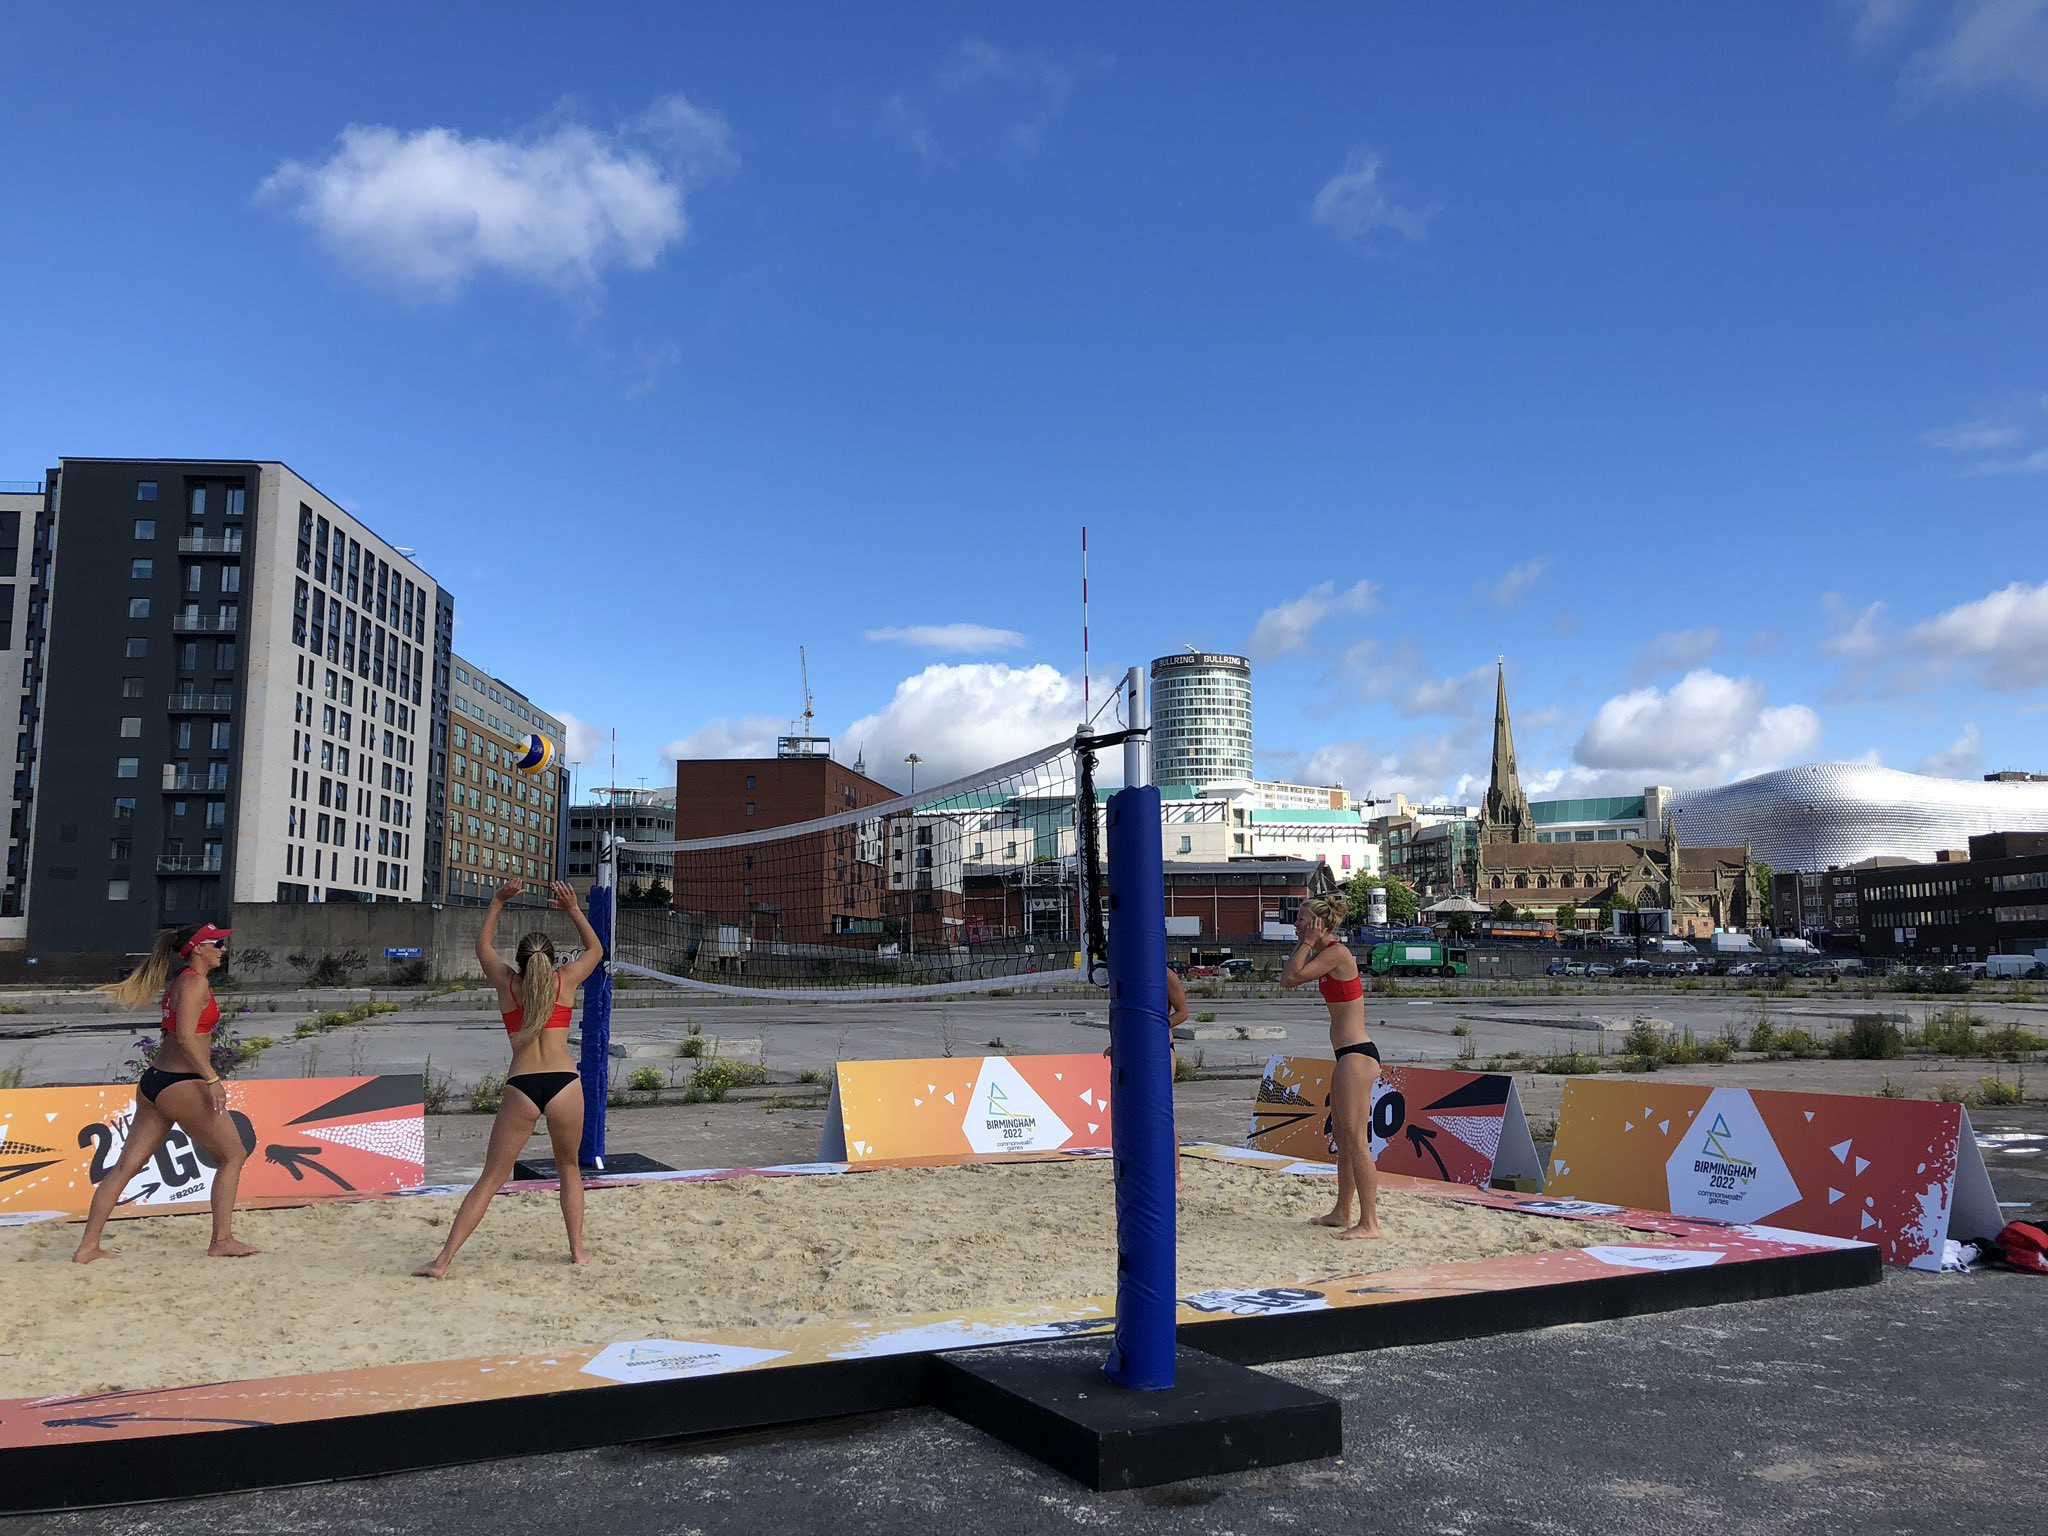 The 3x3 basketball and beach volleyball competitions at the Commonwealth Games are set to take place in the centre of Birmingham ©ITG